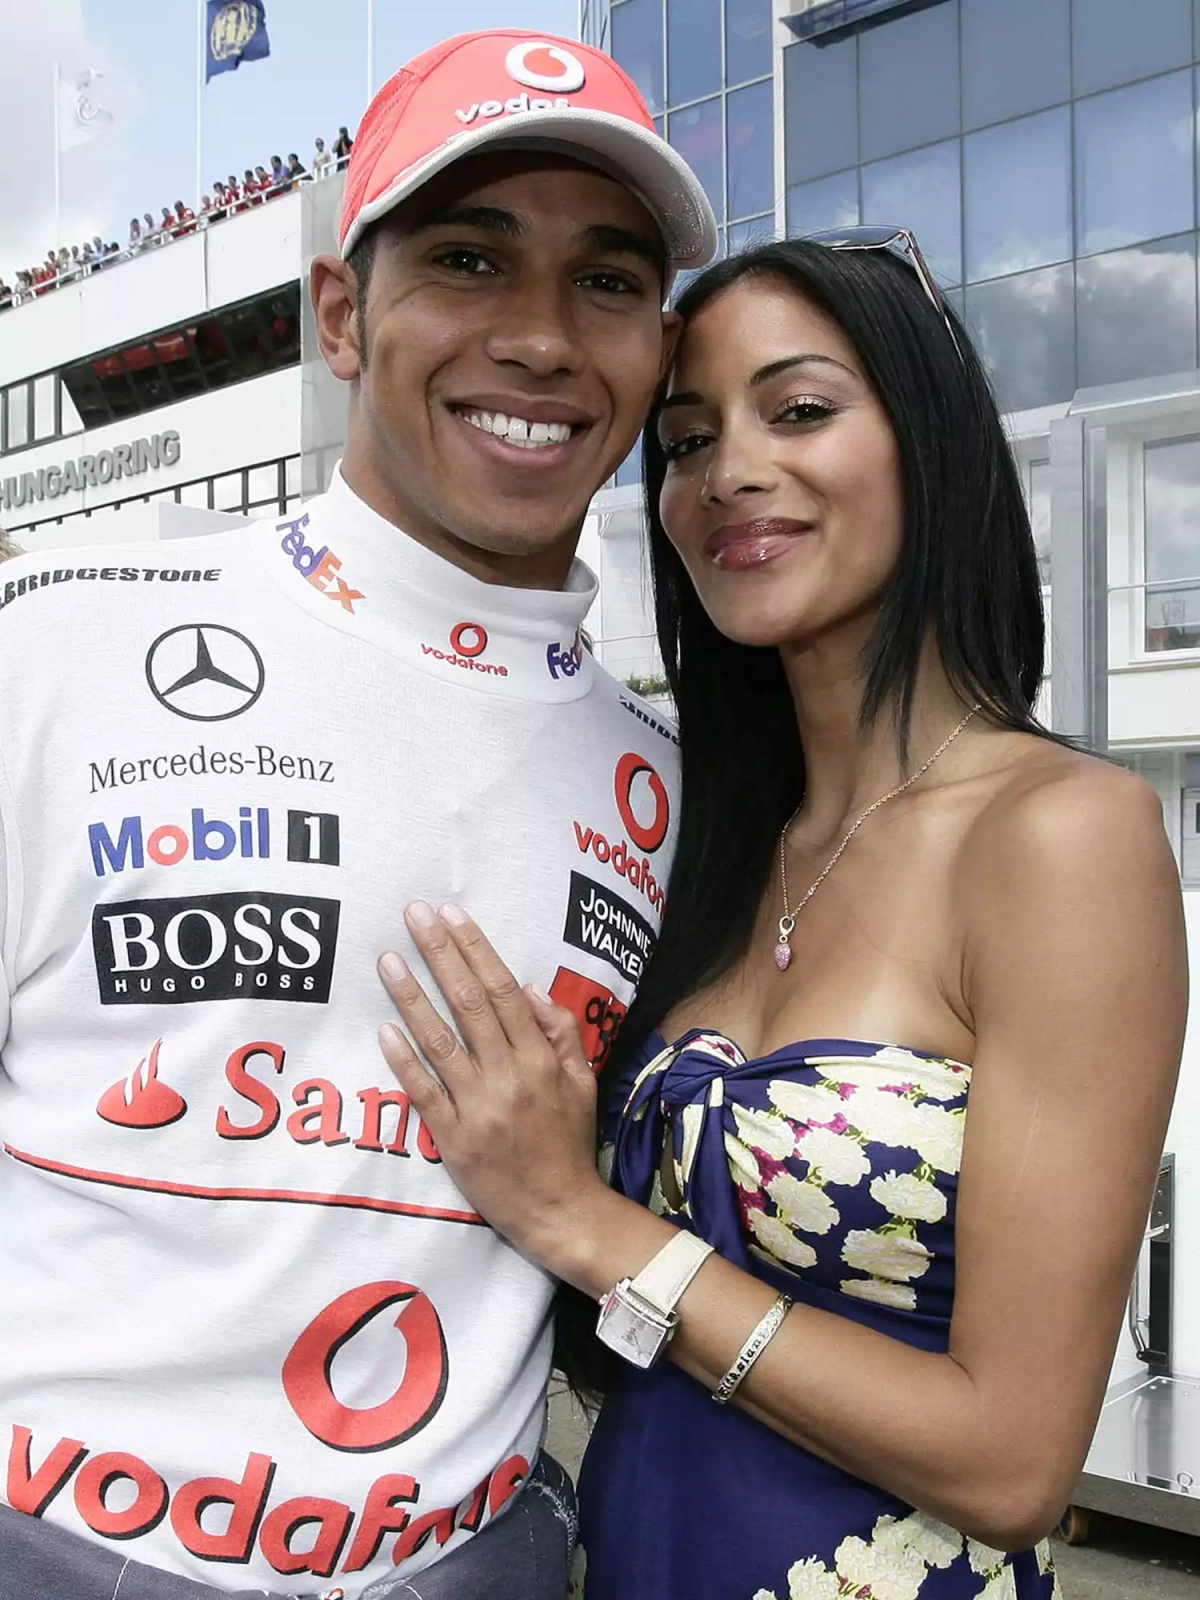 list of F1 driver's long-lasting girls with the most famous Lewis Hamilton image 4